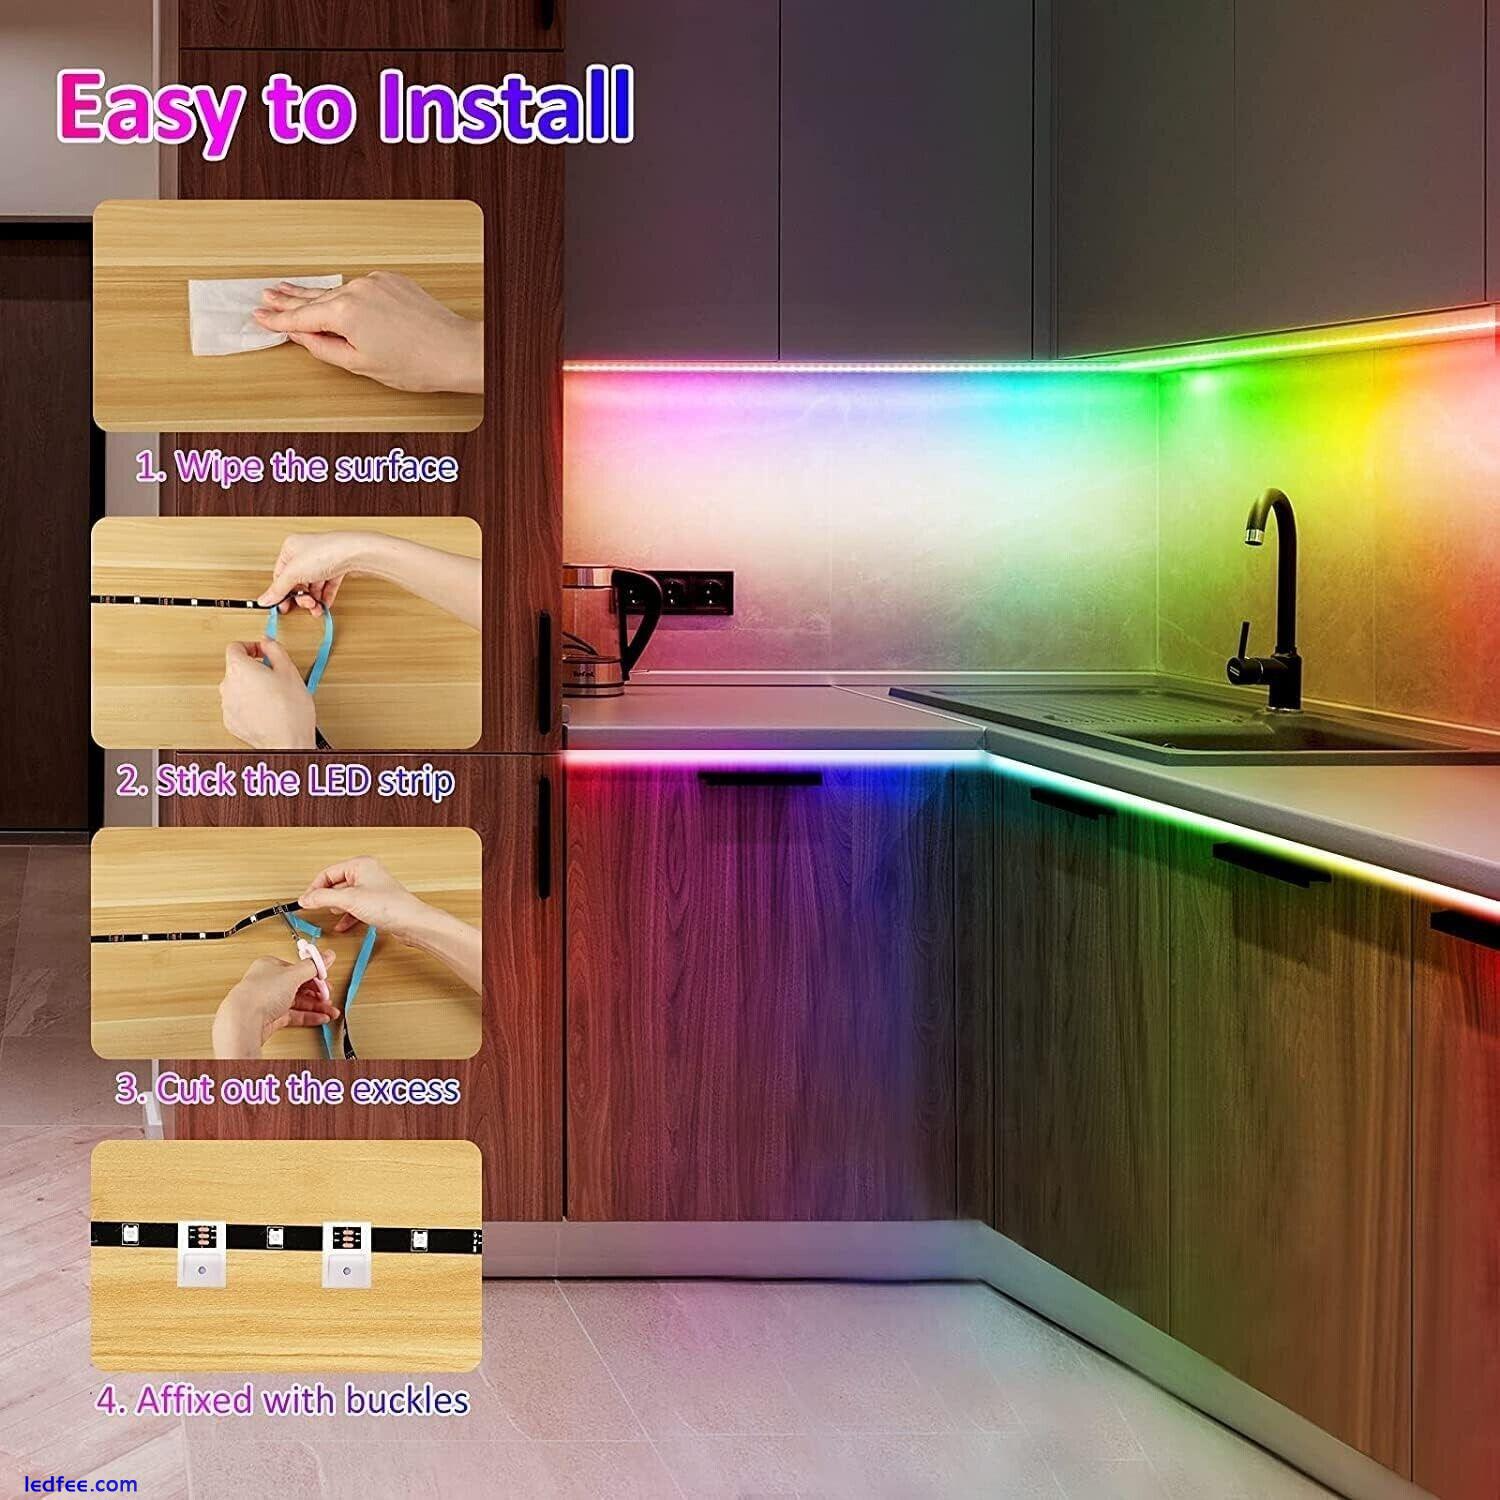 LED Strip Light 5M/16.4 ft, RGB LED Lights for Kitchen, Party, TV with Remote 3 